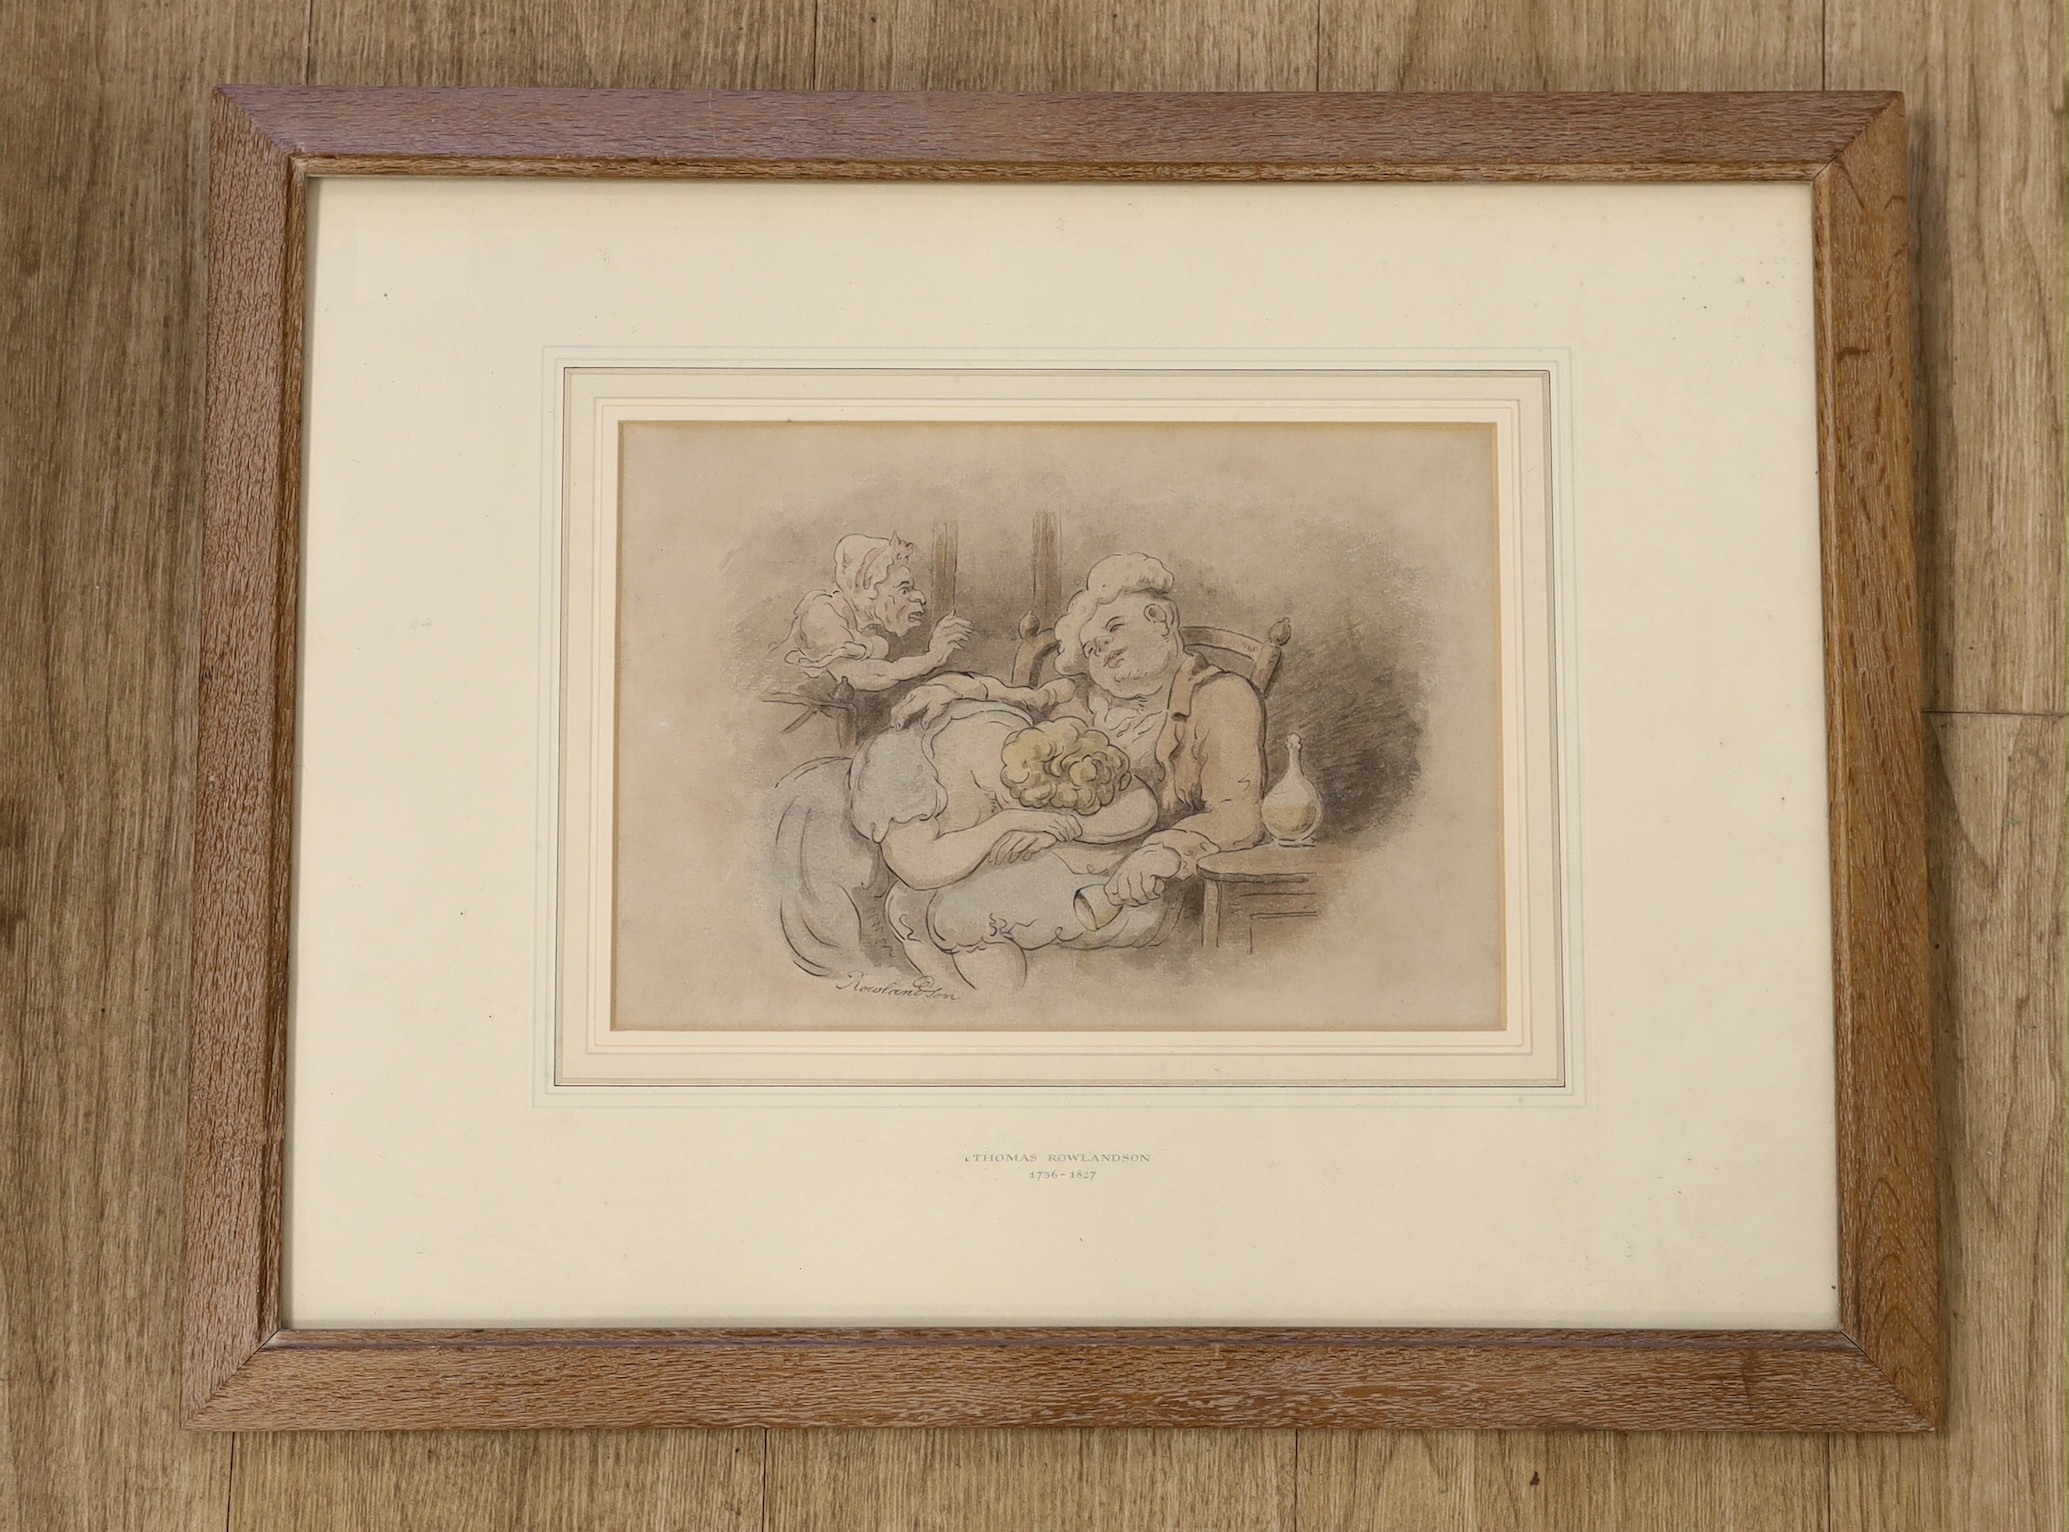 Thomas Rowlandson (1756-1827), ink and watercolour, 'The Drunkard', signed with Bootle Art Gallery - Image 2 of 5